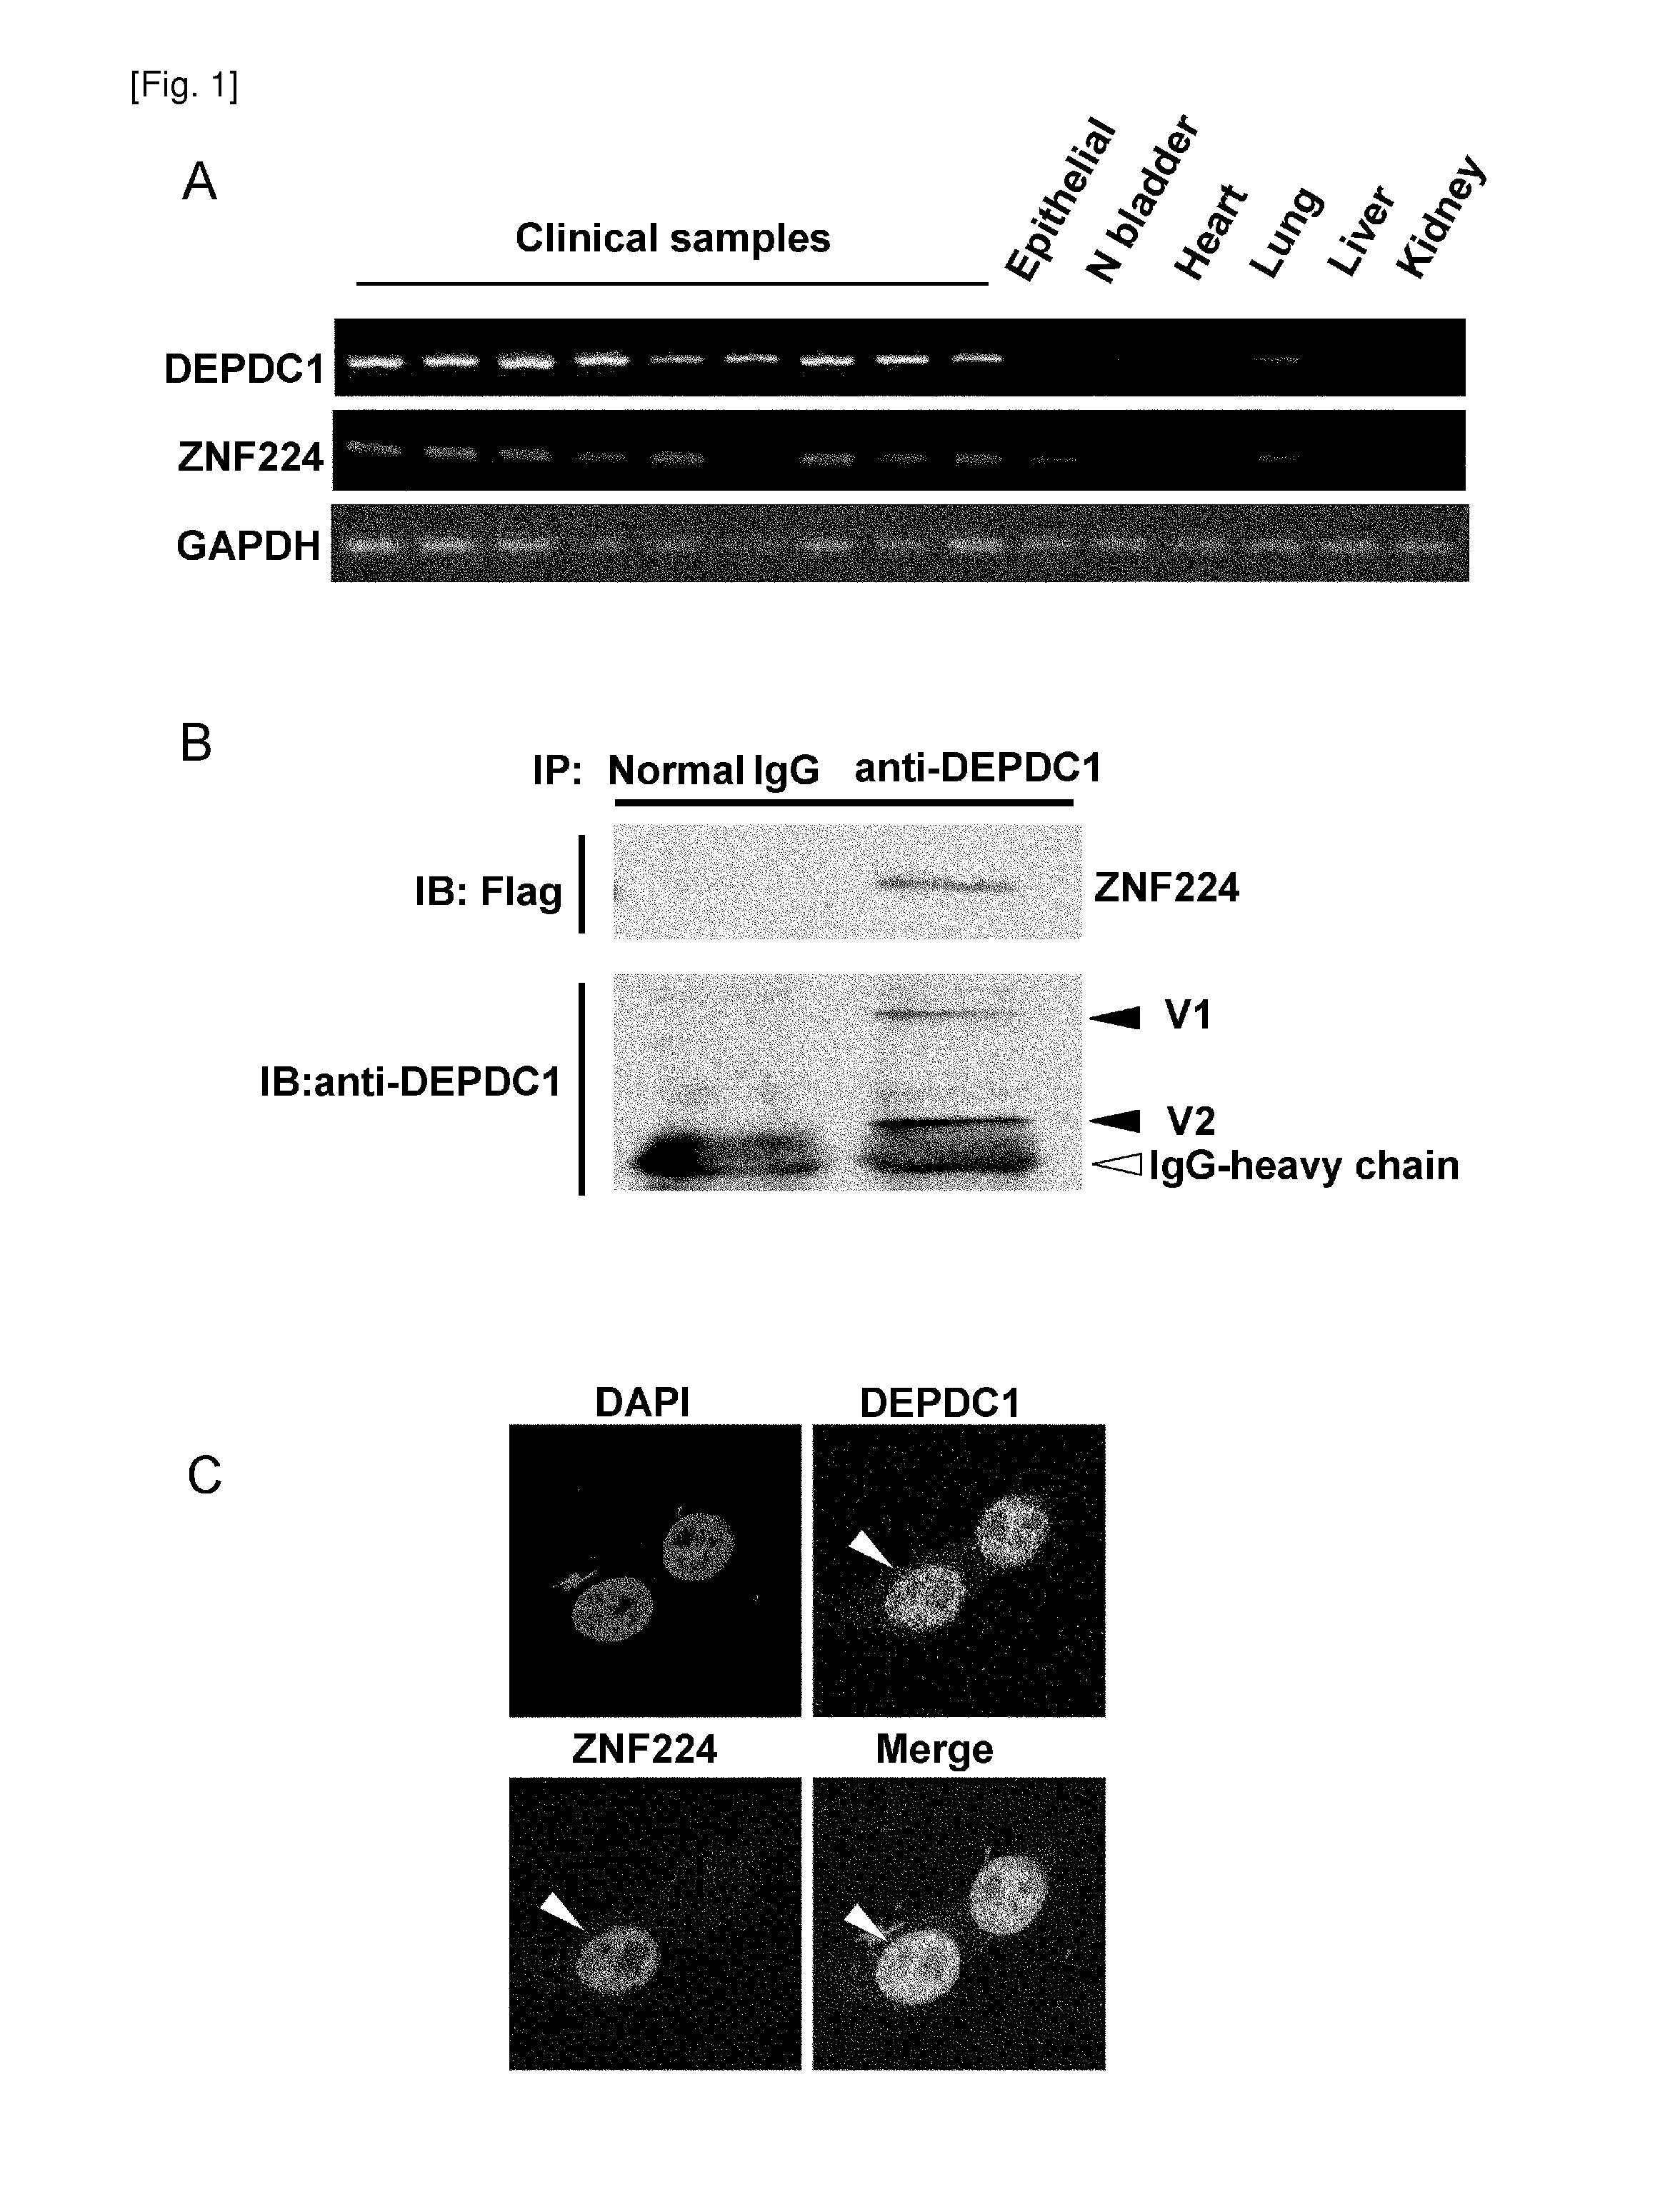 Method for treating or preventing bladder cancer using the depdc1 polypeptide